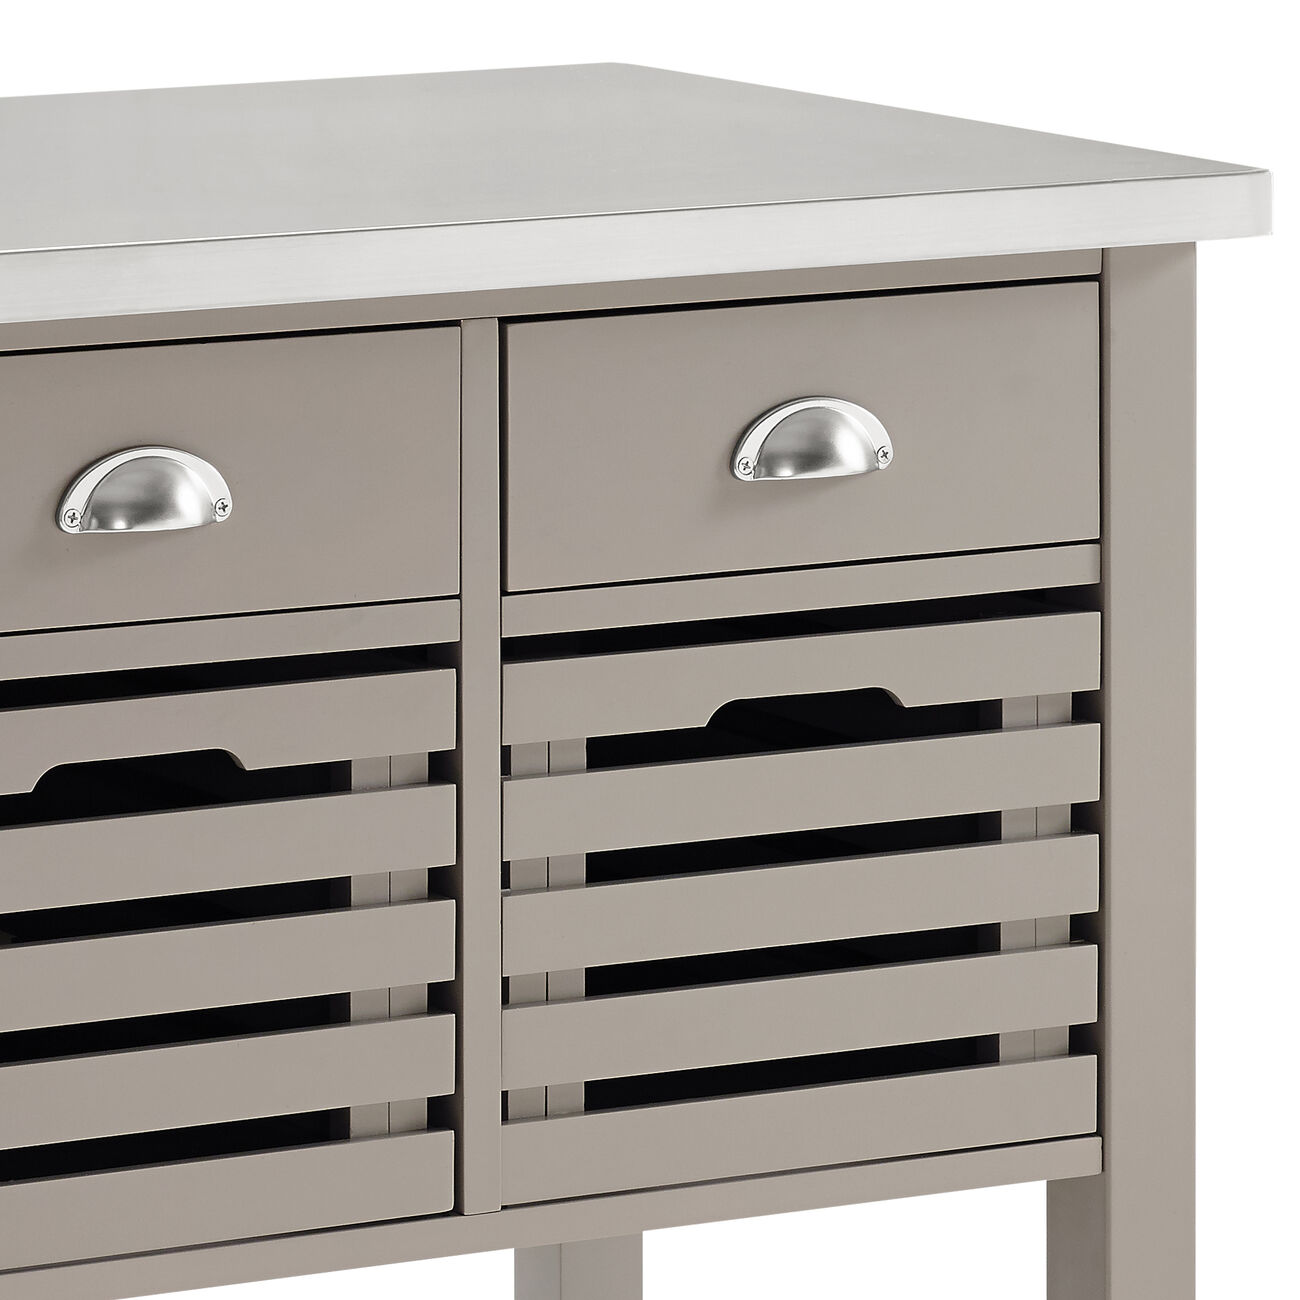 4 Drawer Wooden Kitchen Cart with Caster Wheels, Gray and Silver